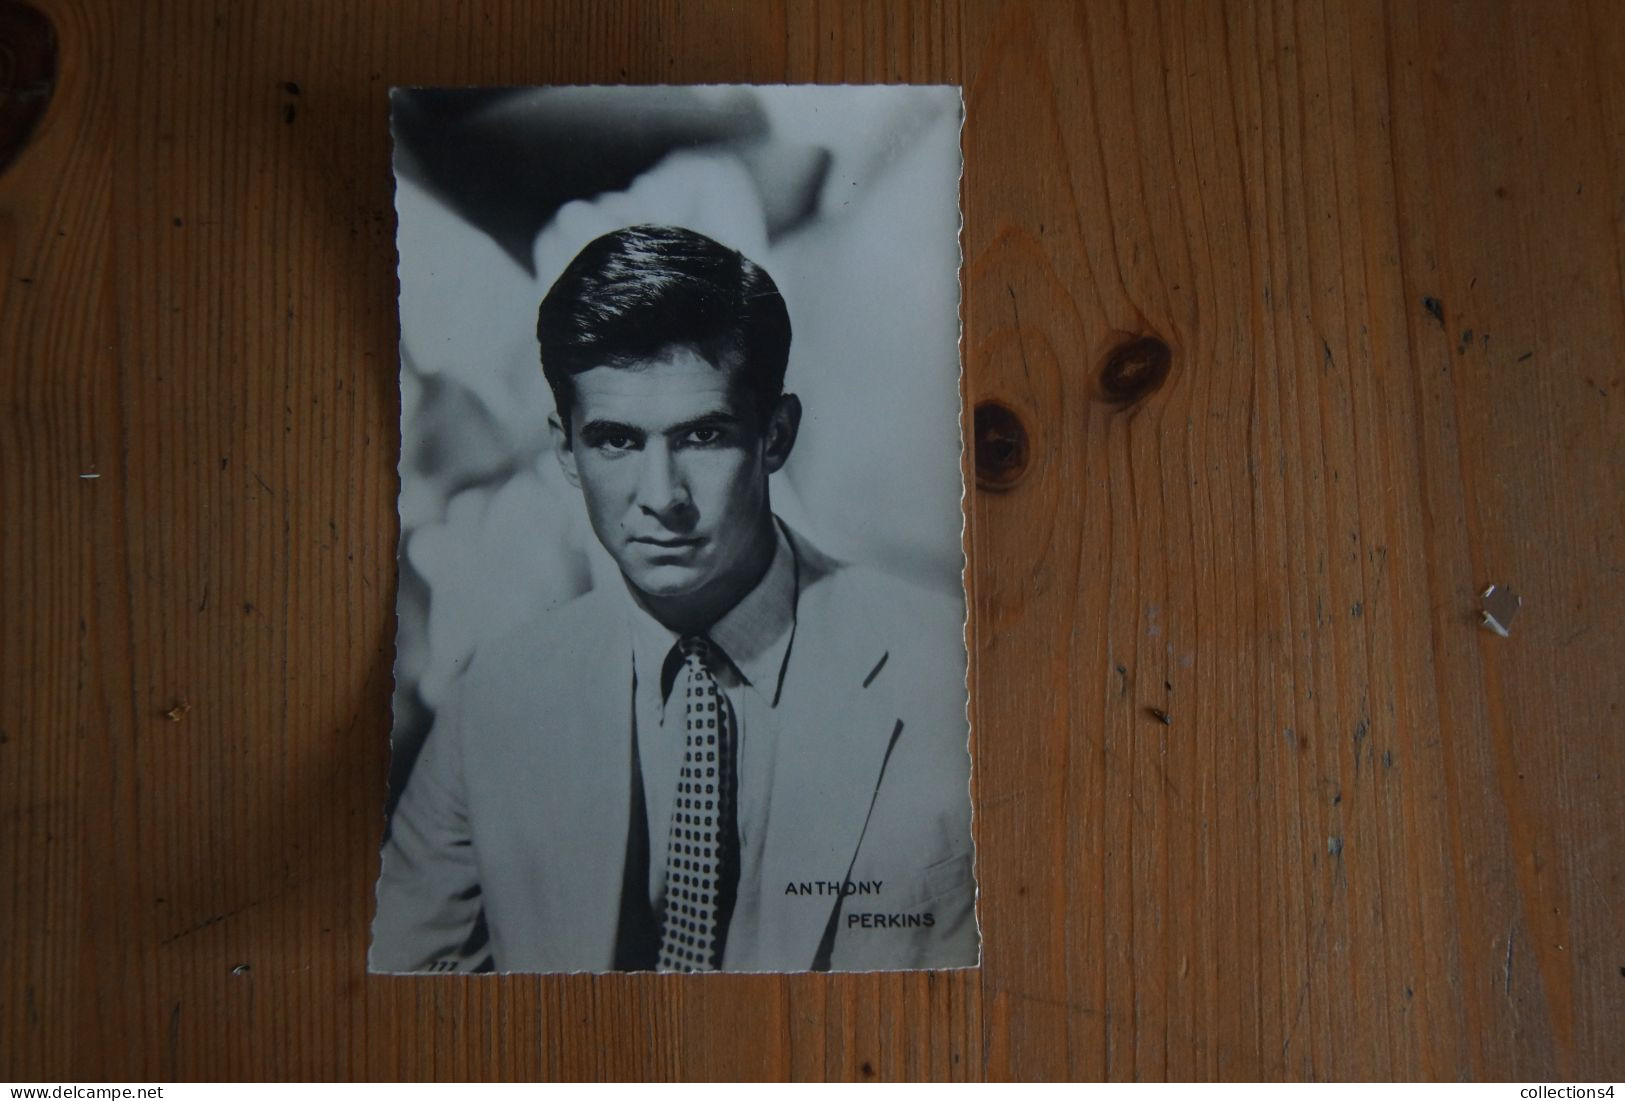 ANTHONY PERKINS CARTE POSTALE - Other Formats